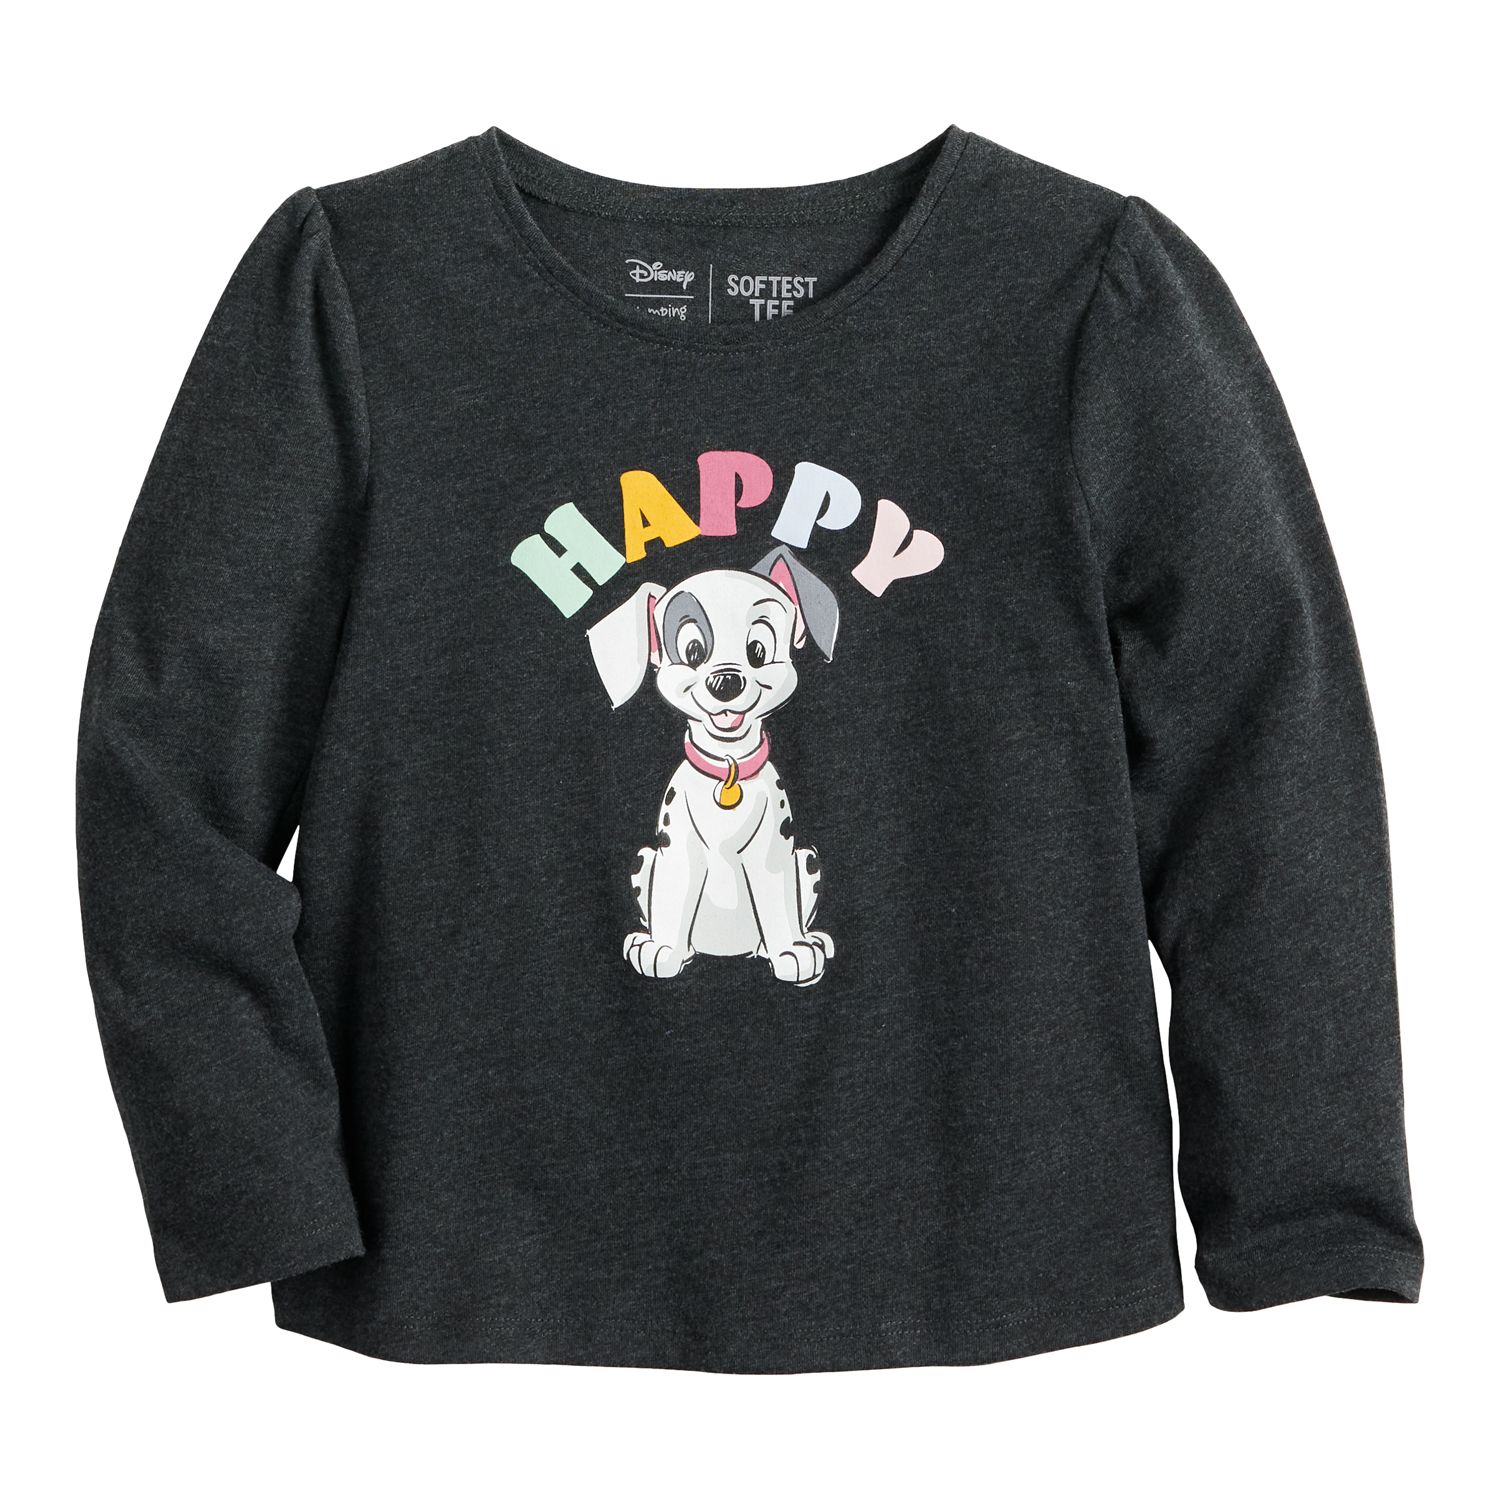 Image for Disney/Jumping Beans Disney's 101 Dalmatians Toddler Girl Happy Tee by Jumping Beans® at Kohl's.